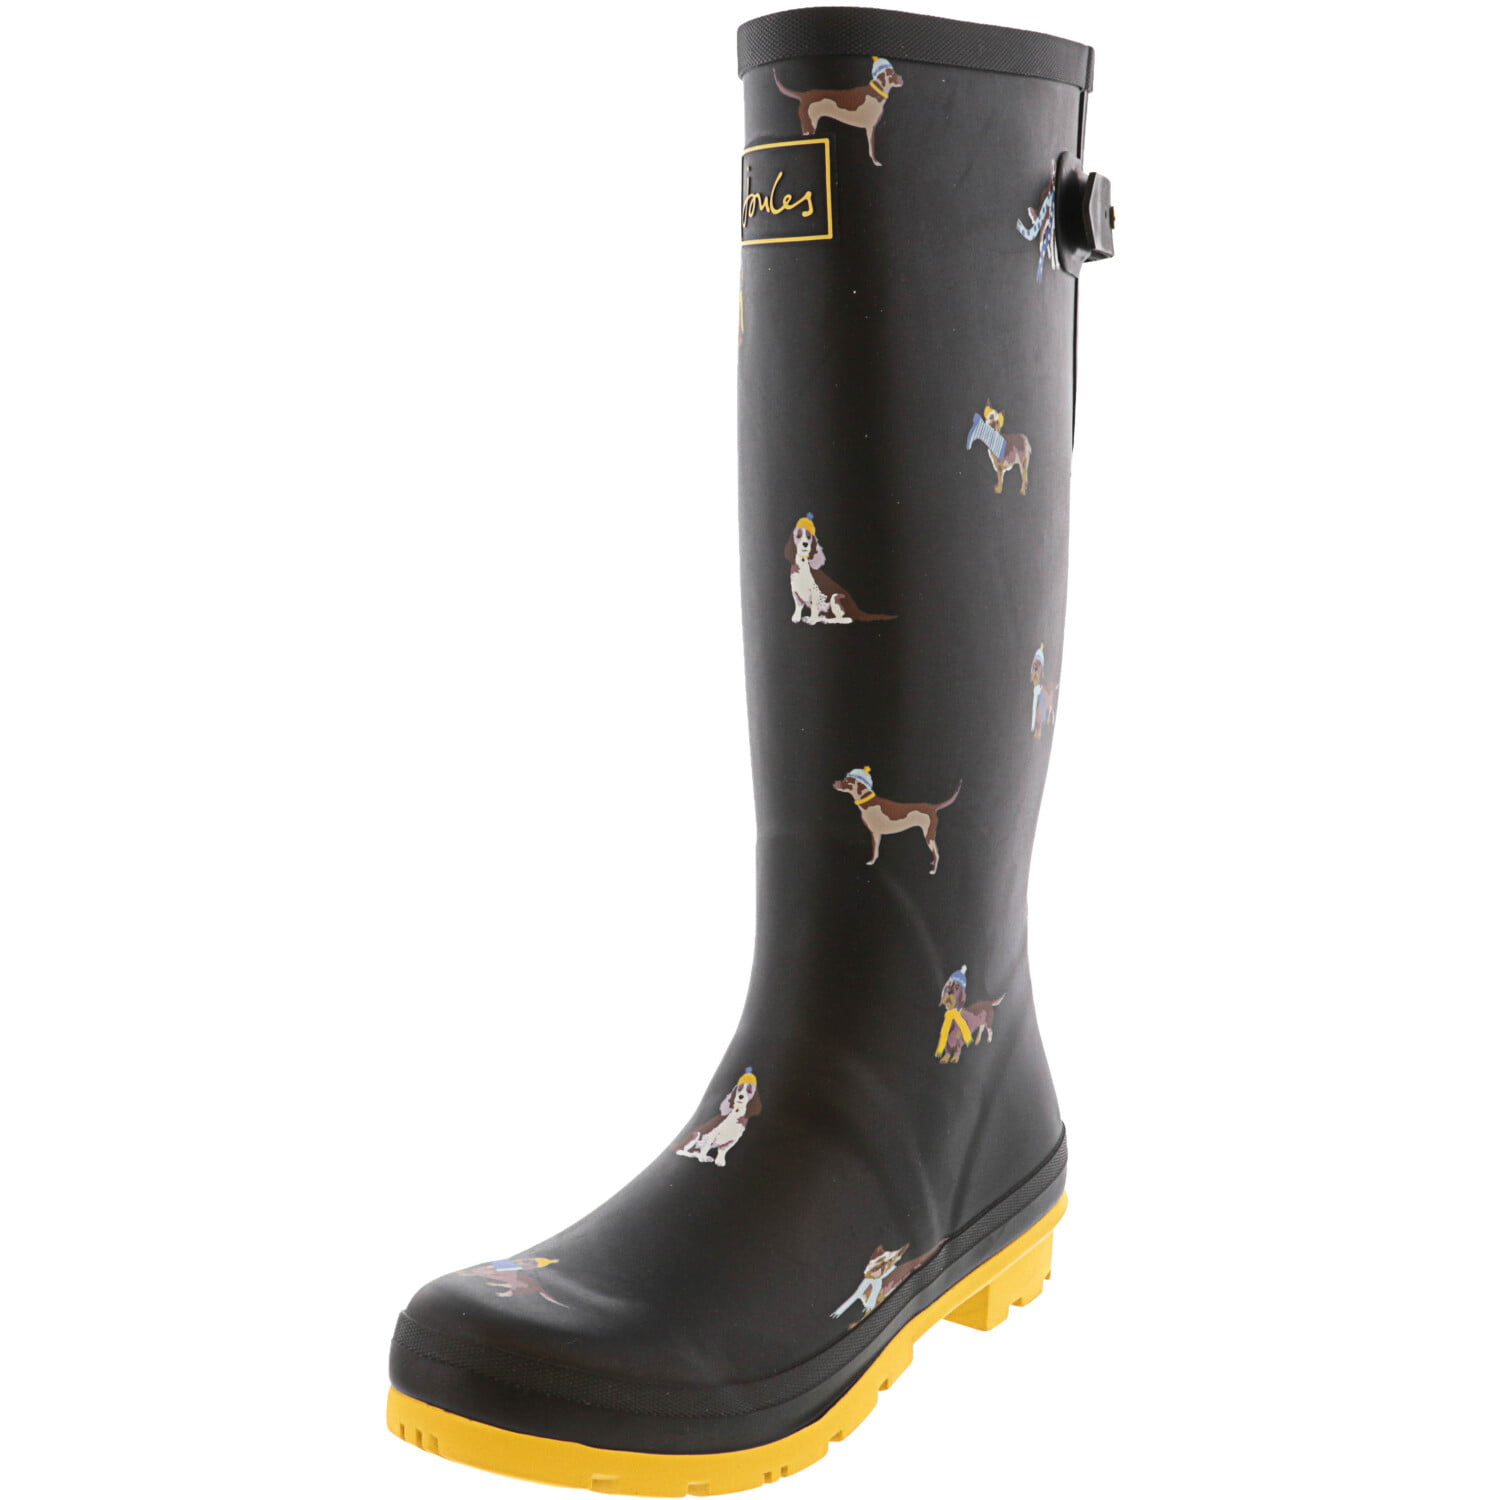 Joules Women's Welly Print Black Dogs Knee-High Rubber Rain Boot - 9M ...